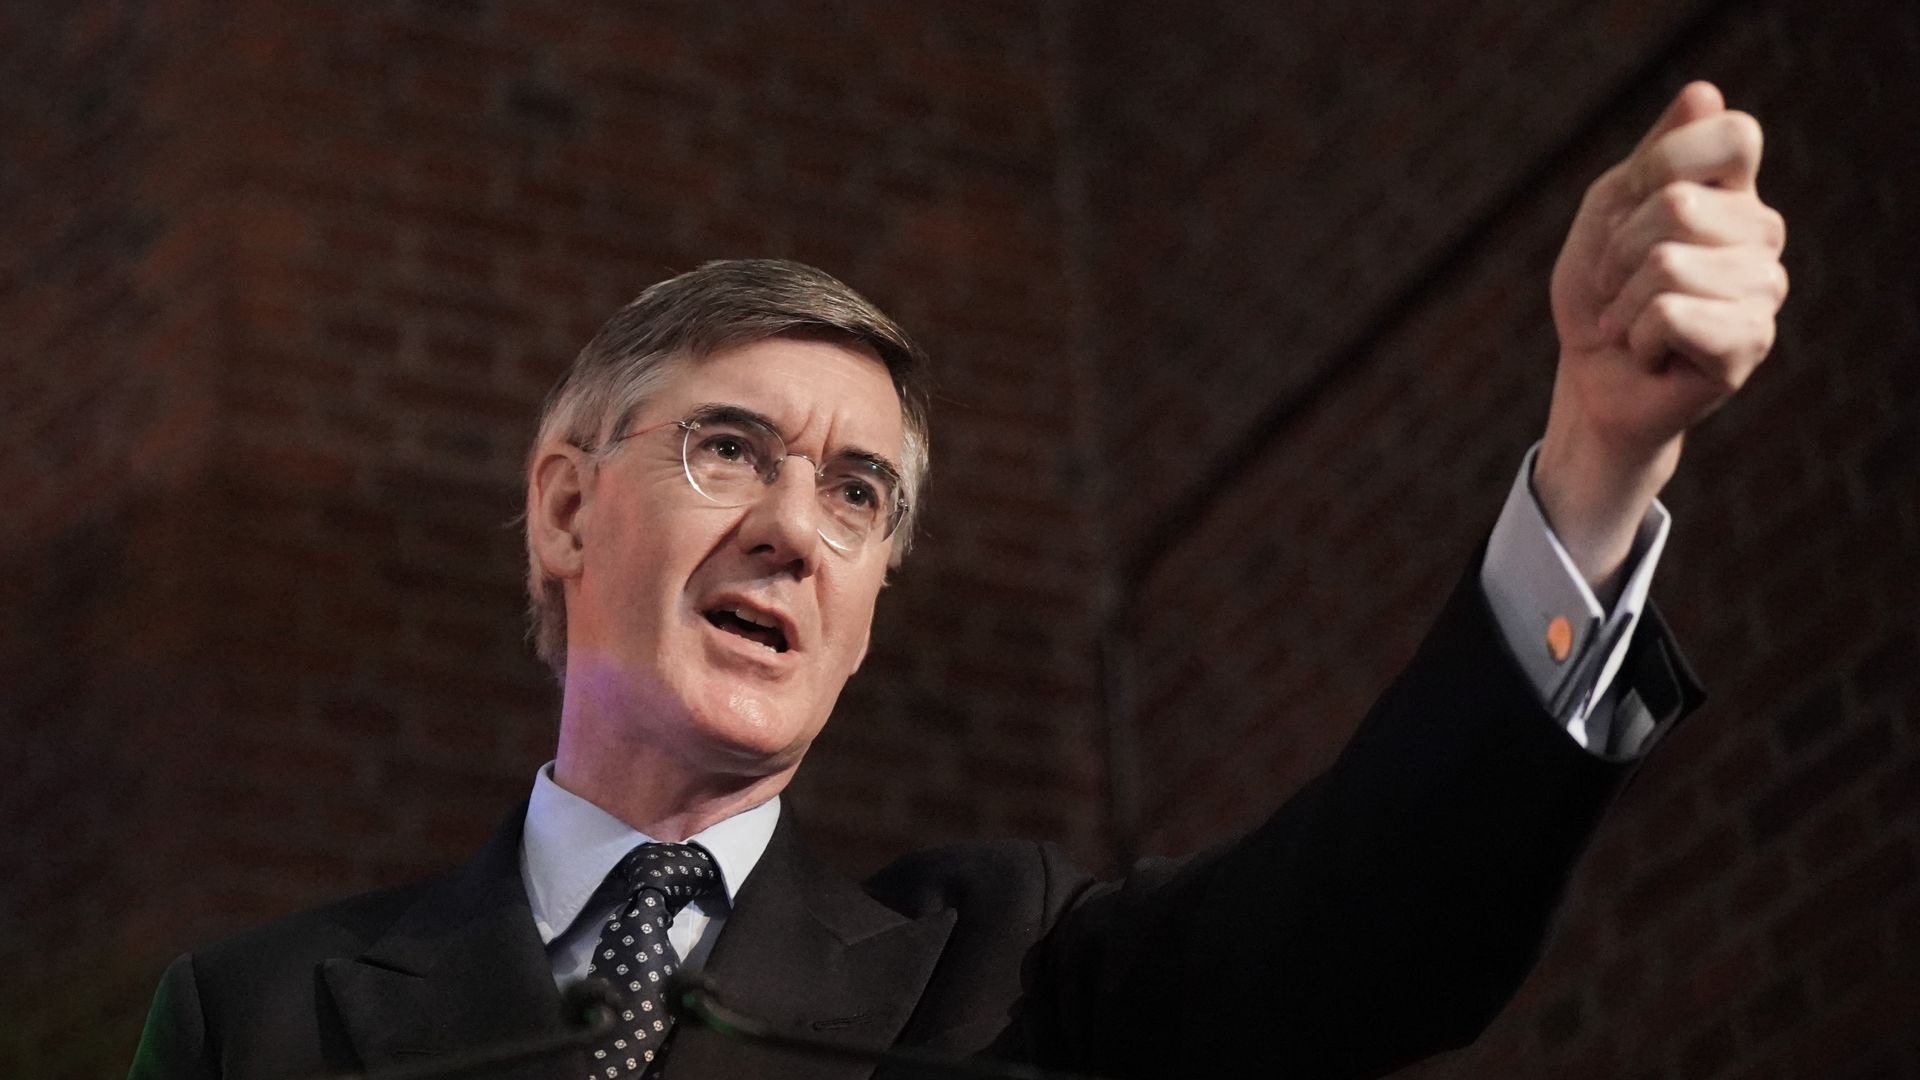 Jacob Rees-Mogg says protest was 'legitimate' after he was chased by demonstrators...